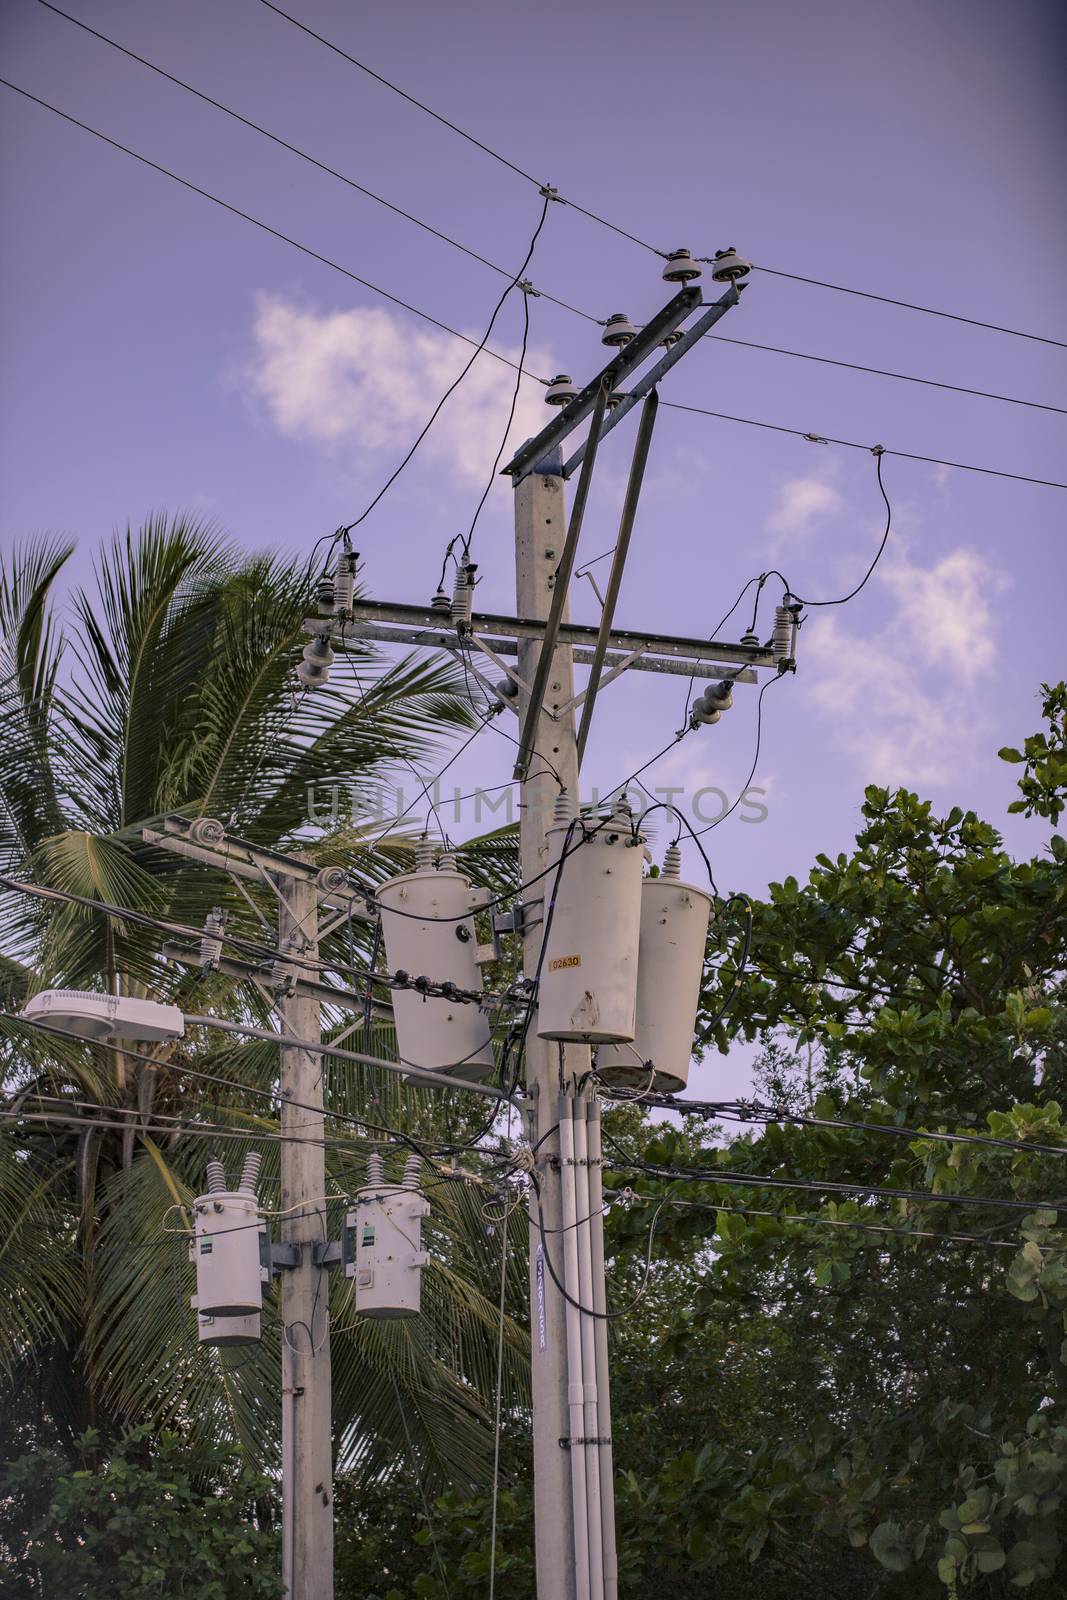 Electrical transformers on poles in Dominican republic